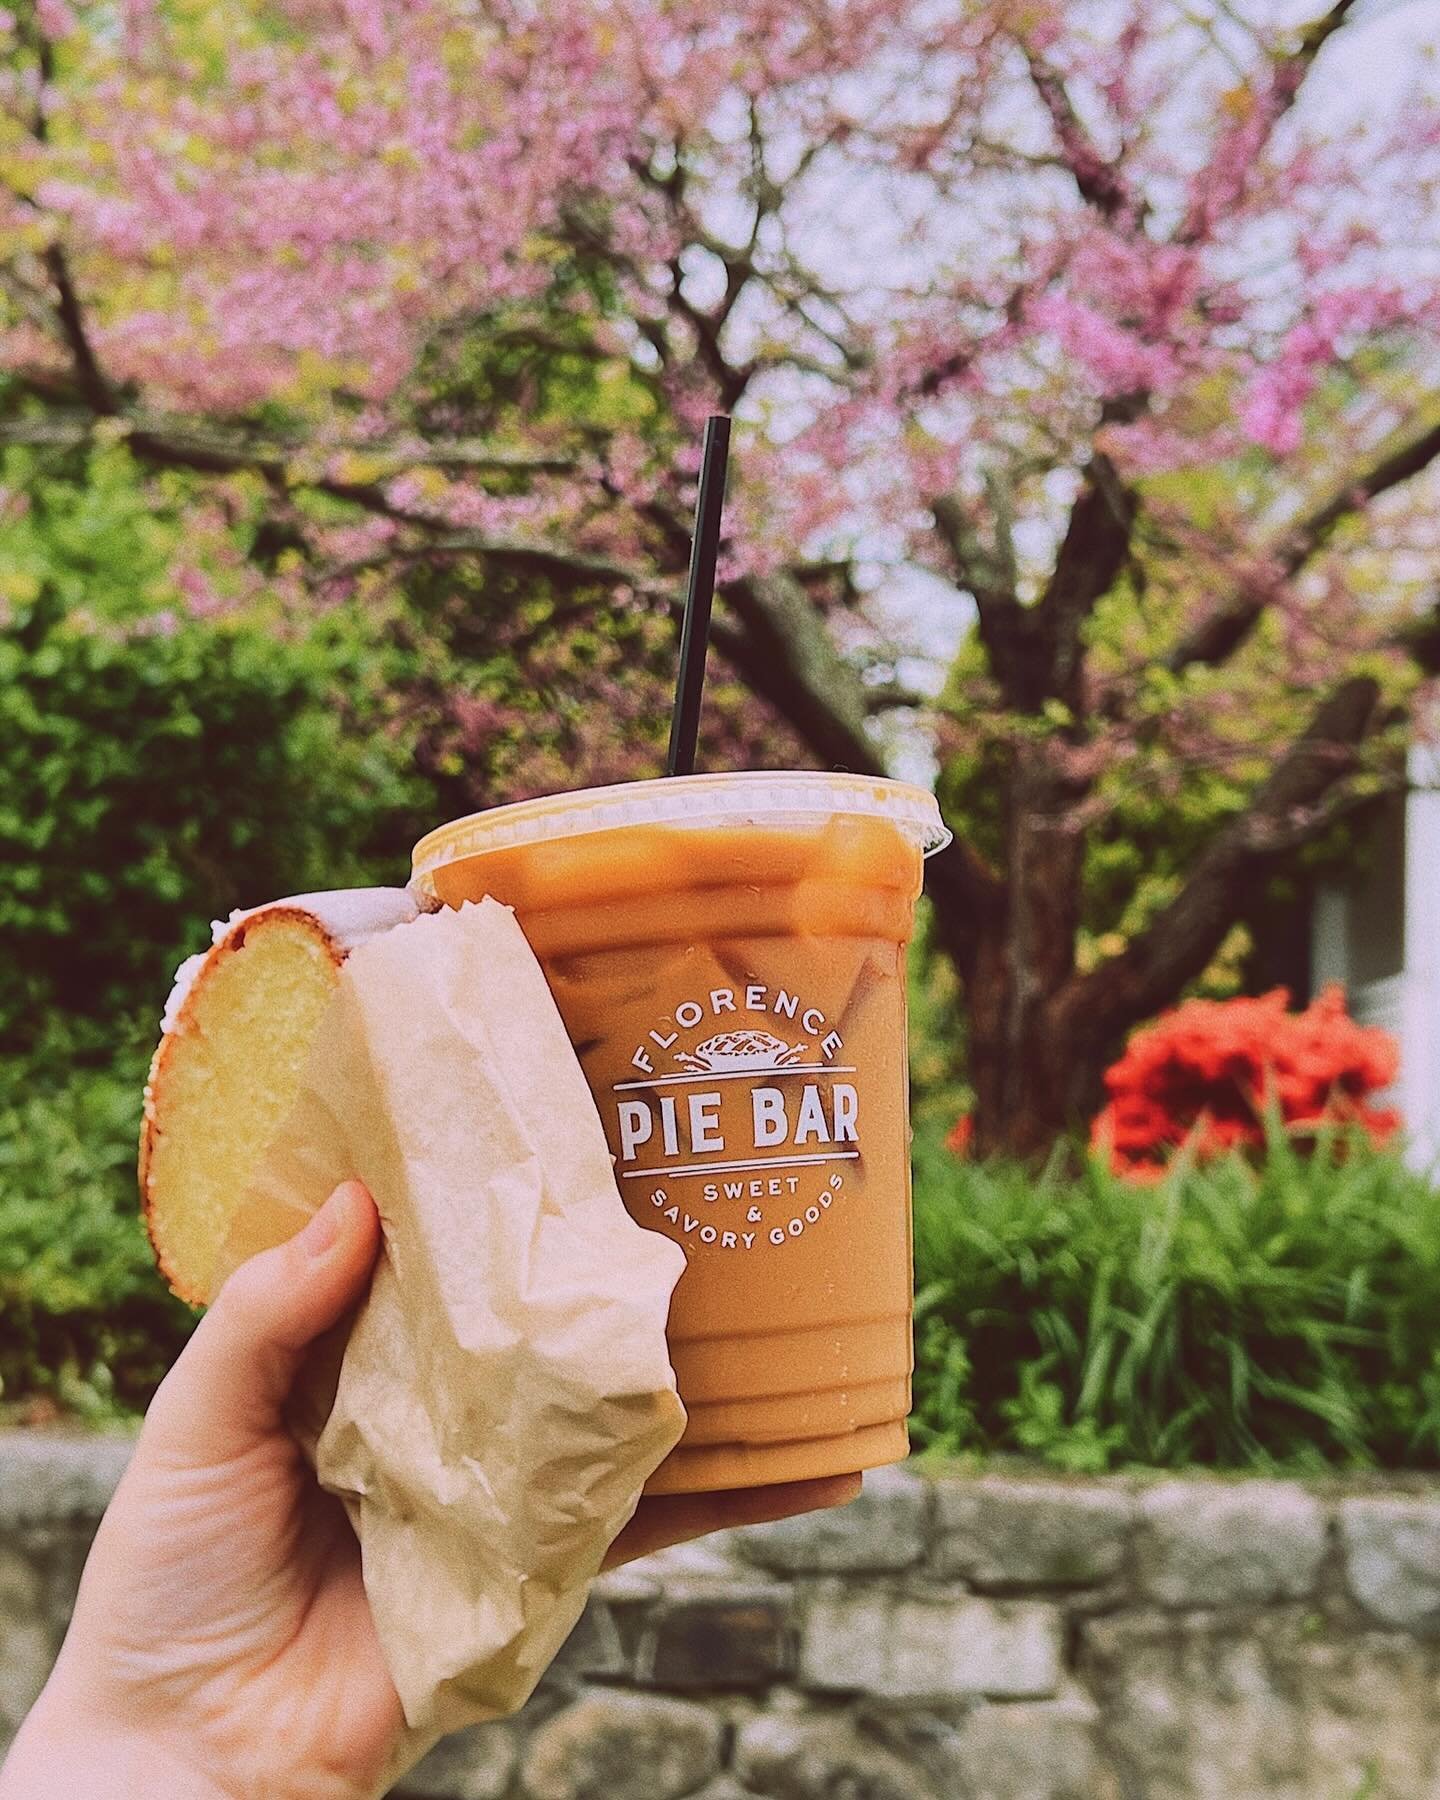 Whether it&rsquo;s spring blooms and a few rainy days or you and caffeine with a sweet treat&mdash;everyone needs a little something to refuel✨
&bull;
We&rsquo;ll be here for the next few days with all kinds of delicious things&mdash;and the weather 